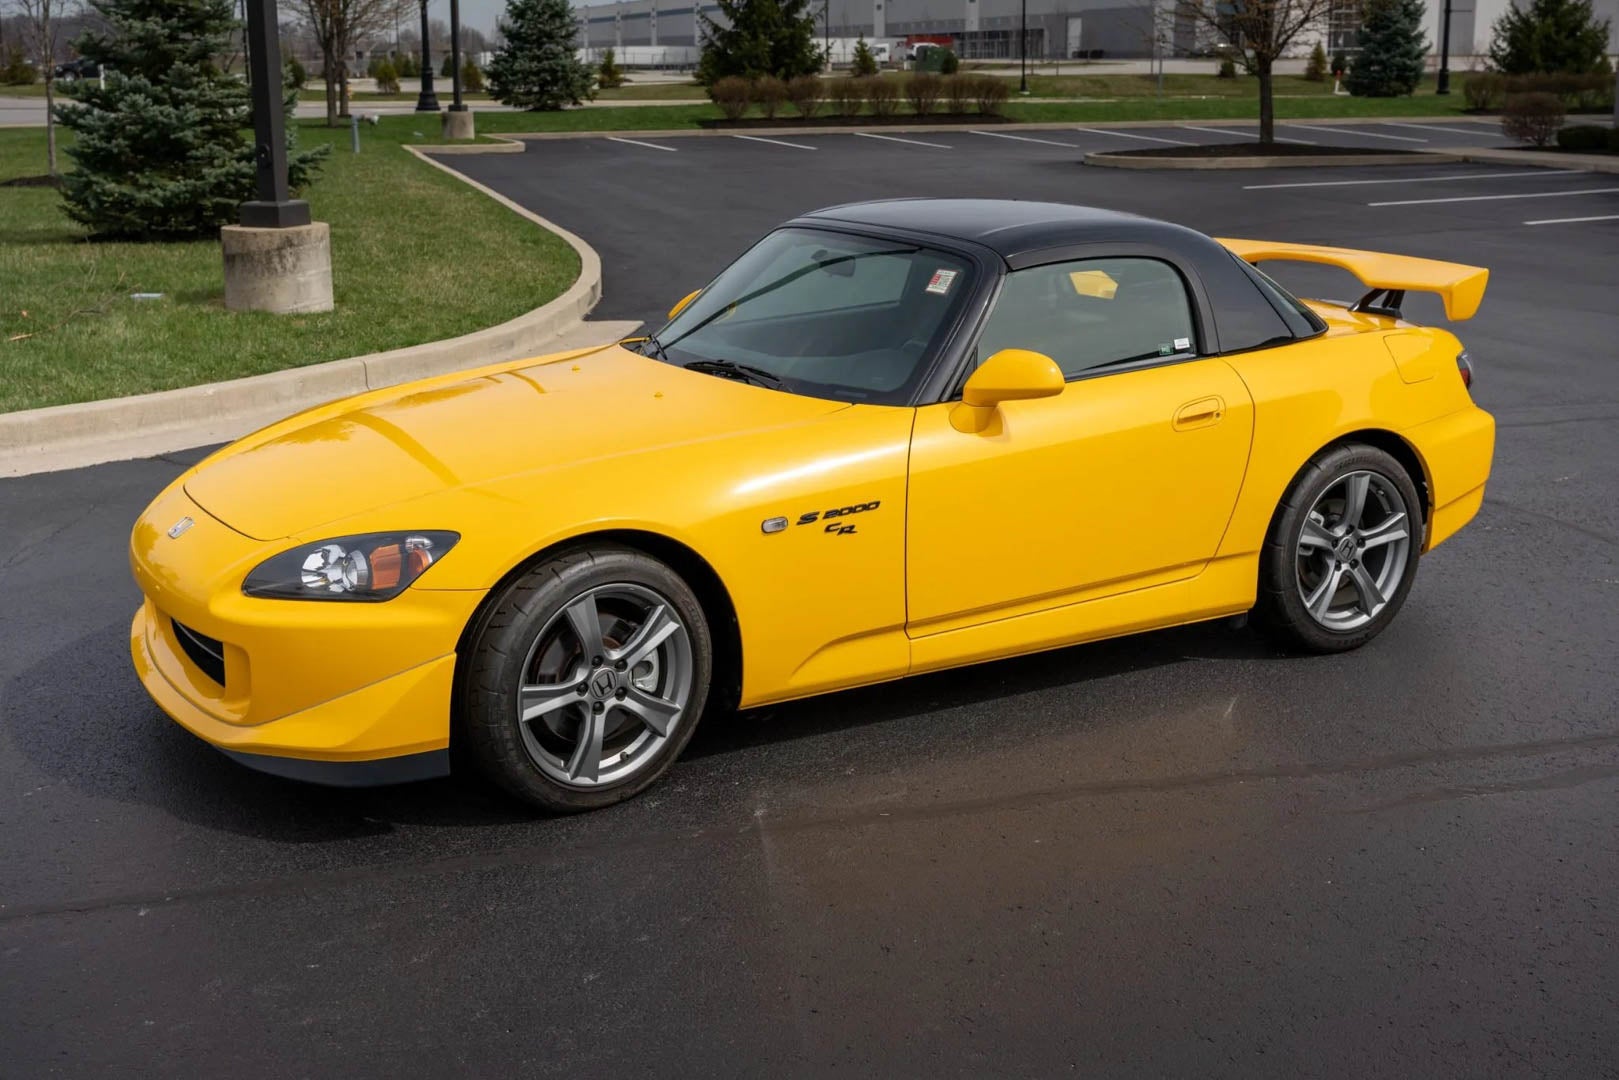 Ultra-Rare 123-Mile Honda S2000 CR Sells for an Eye-Watering 0,000